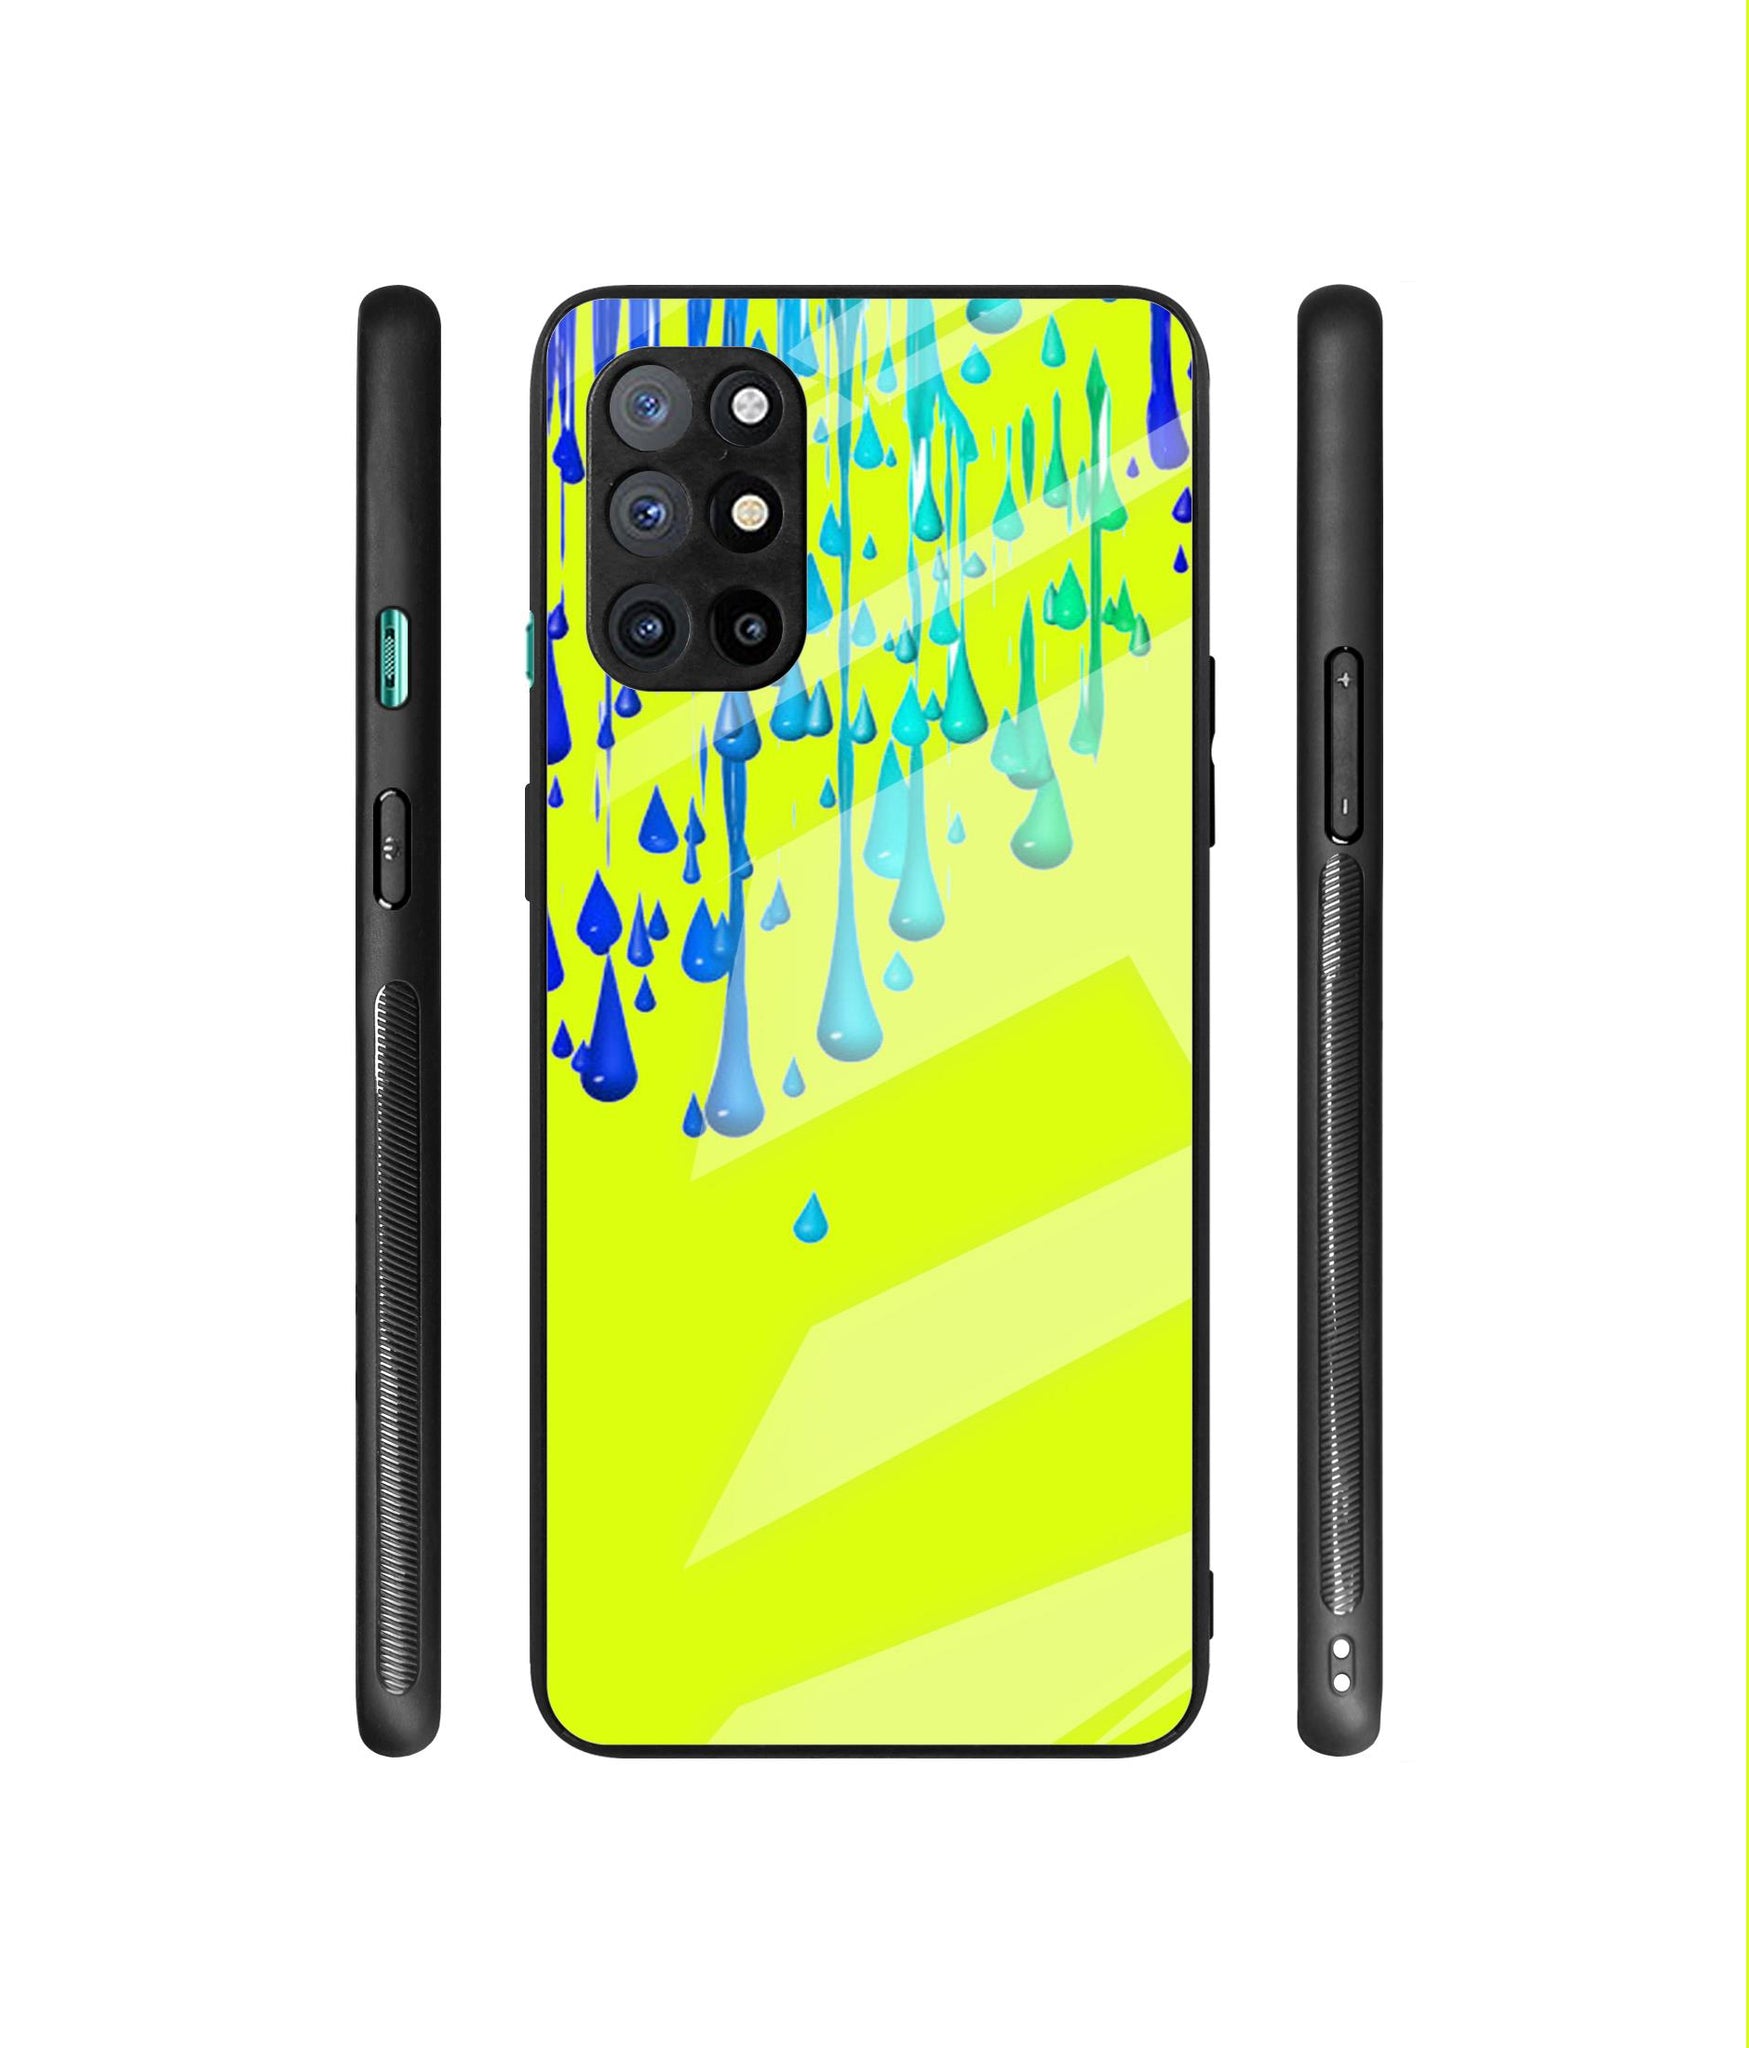 Neon Paint Designer Printed Glass Cover for OnePlus 8T